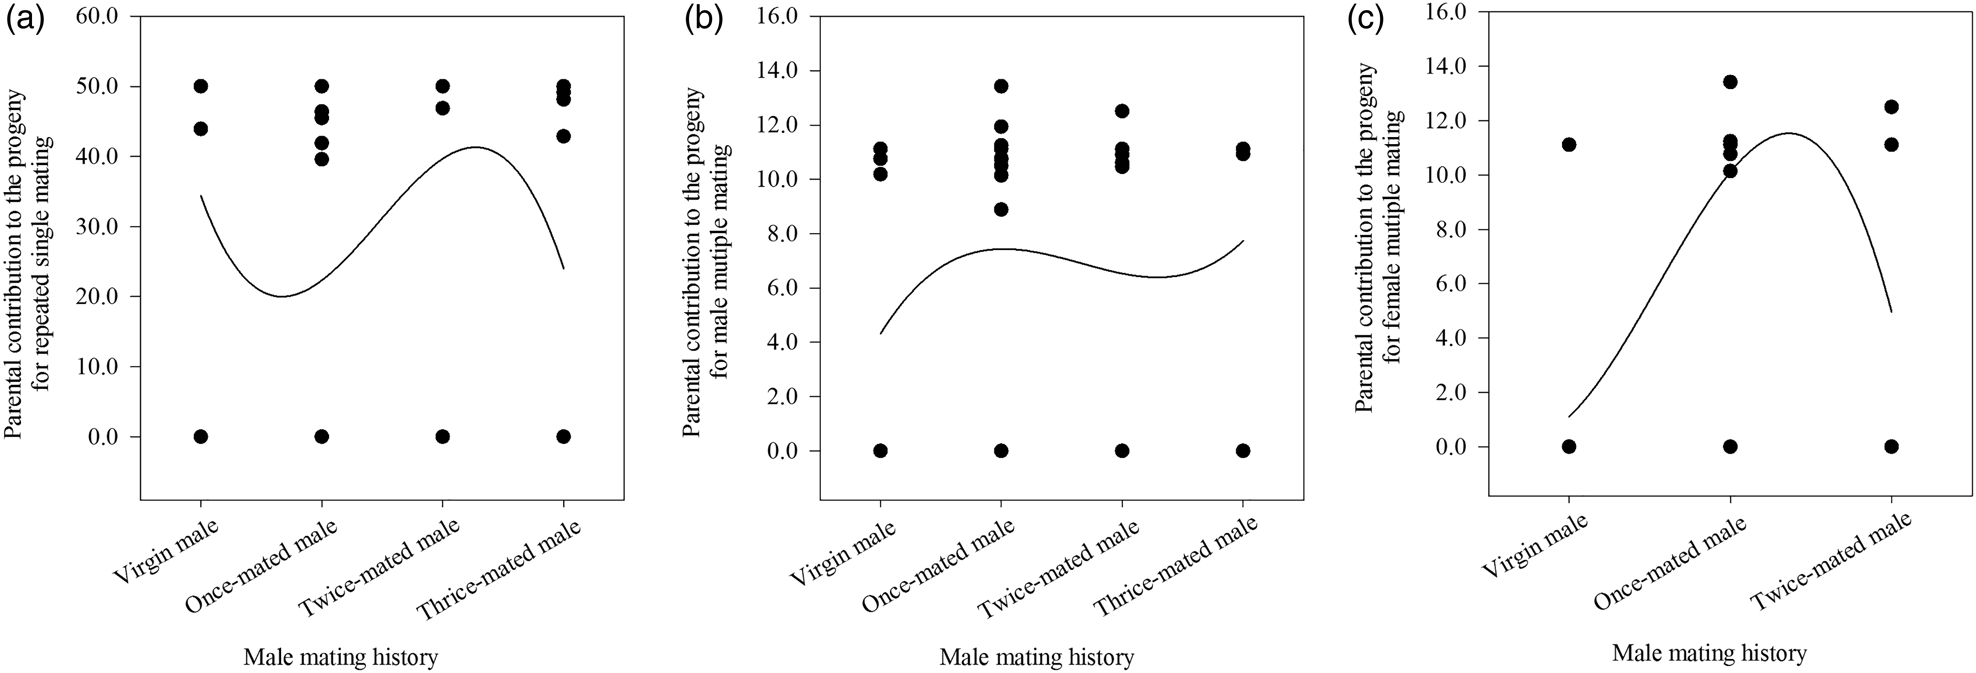 Effects Of Operational Sex Ratio Mating Age And Male Mating History On Mating And Reproductive 